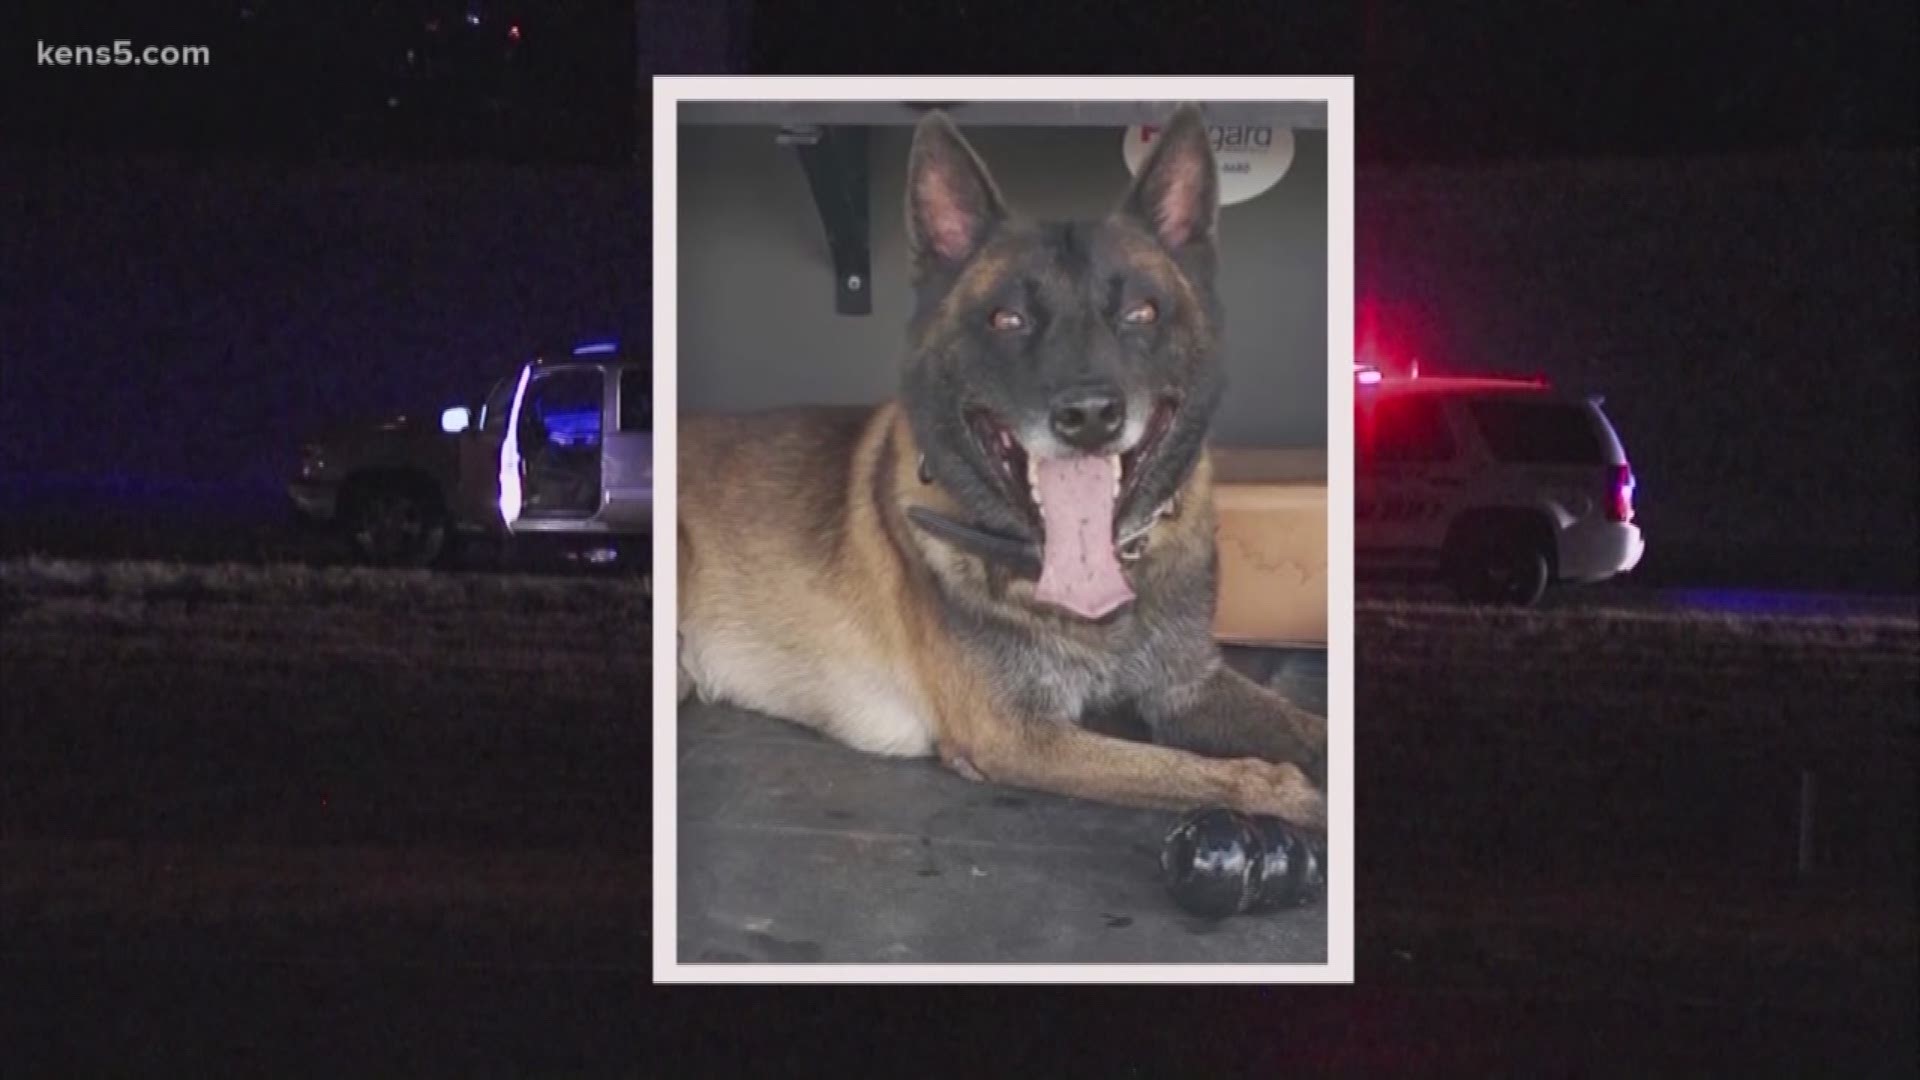 Ten months after BCSO controversially unleashed a K-9 on an armed suspect without a protective vest, a necropsy report details what killed him.